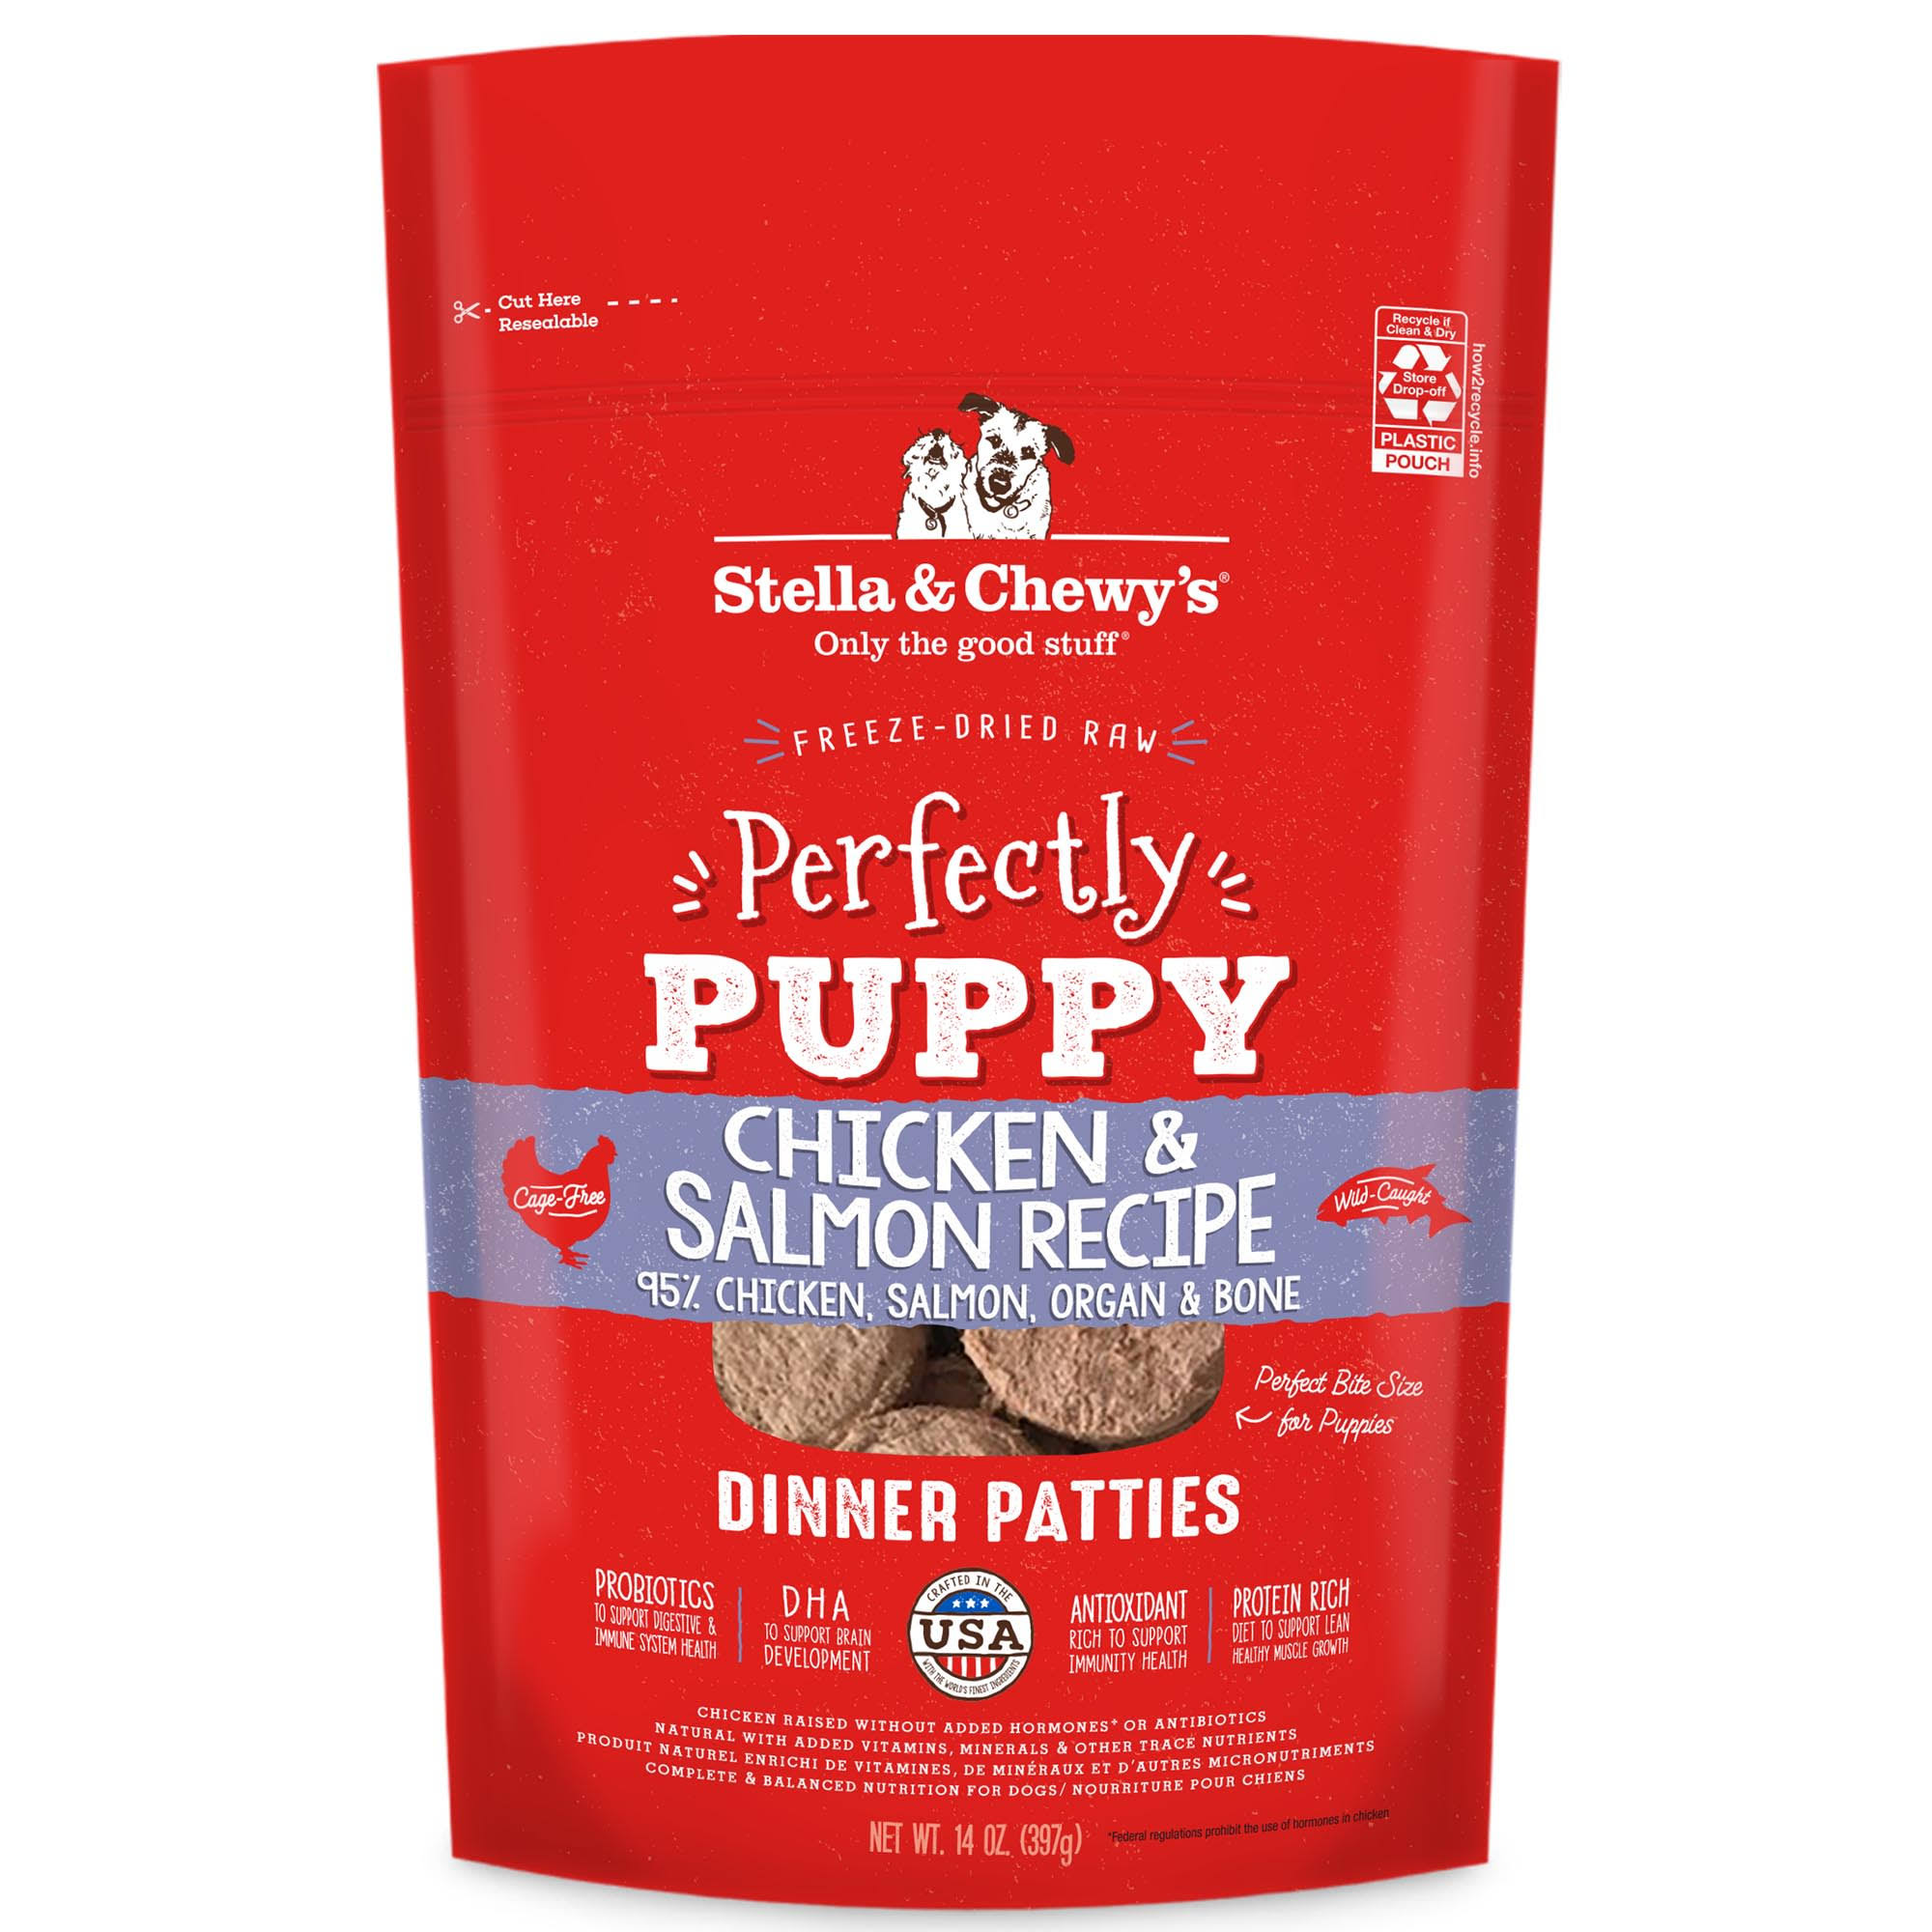 Stella & Chewys Freeze Dried Raw Dinner Patties Crafted For Puppies Grain Free, Protein Rich Perfectly Puppy Chicken & Salmon Recipe 14 oz Bag